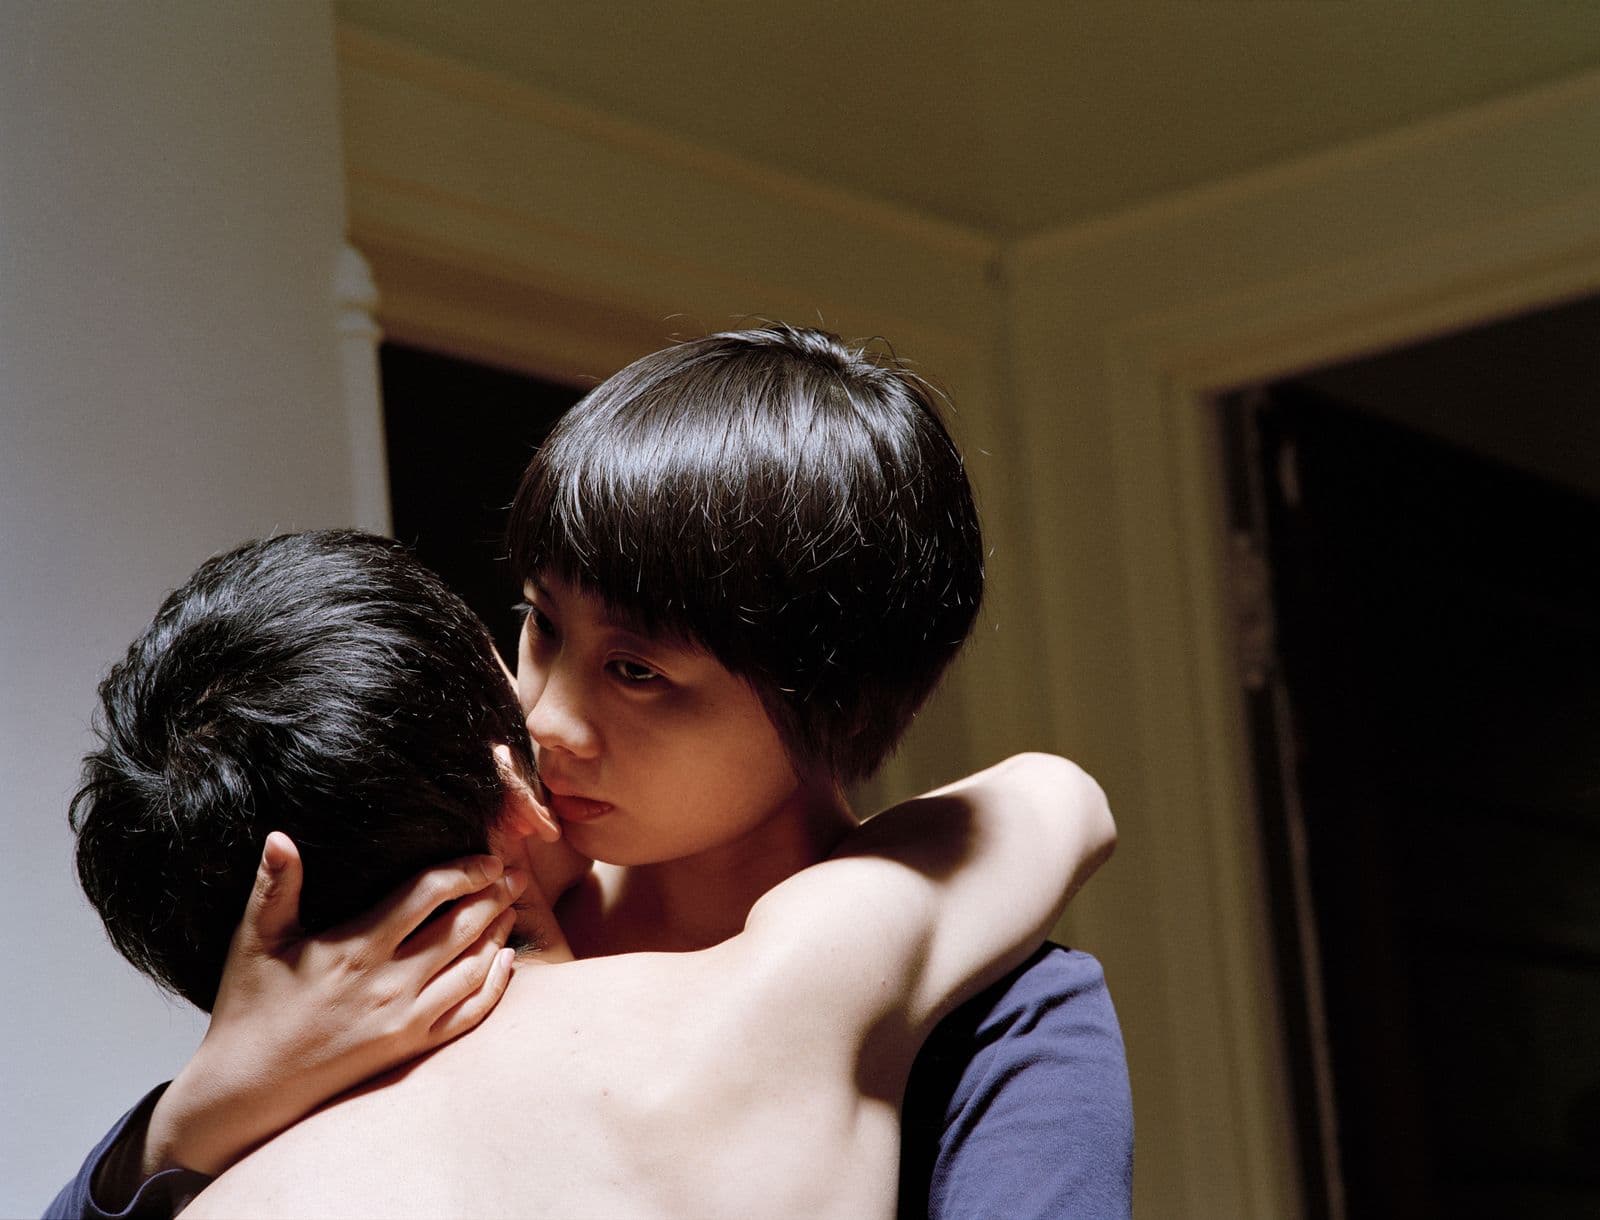 Photographic work of art of two people hugging close-up